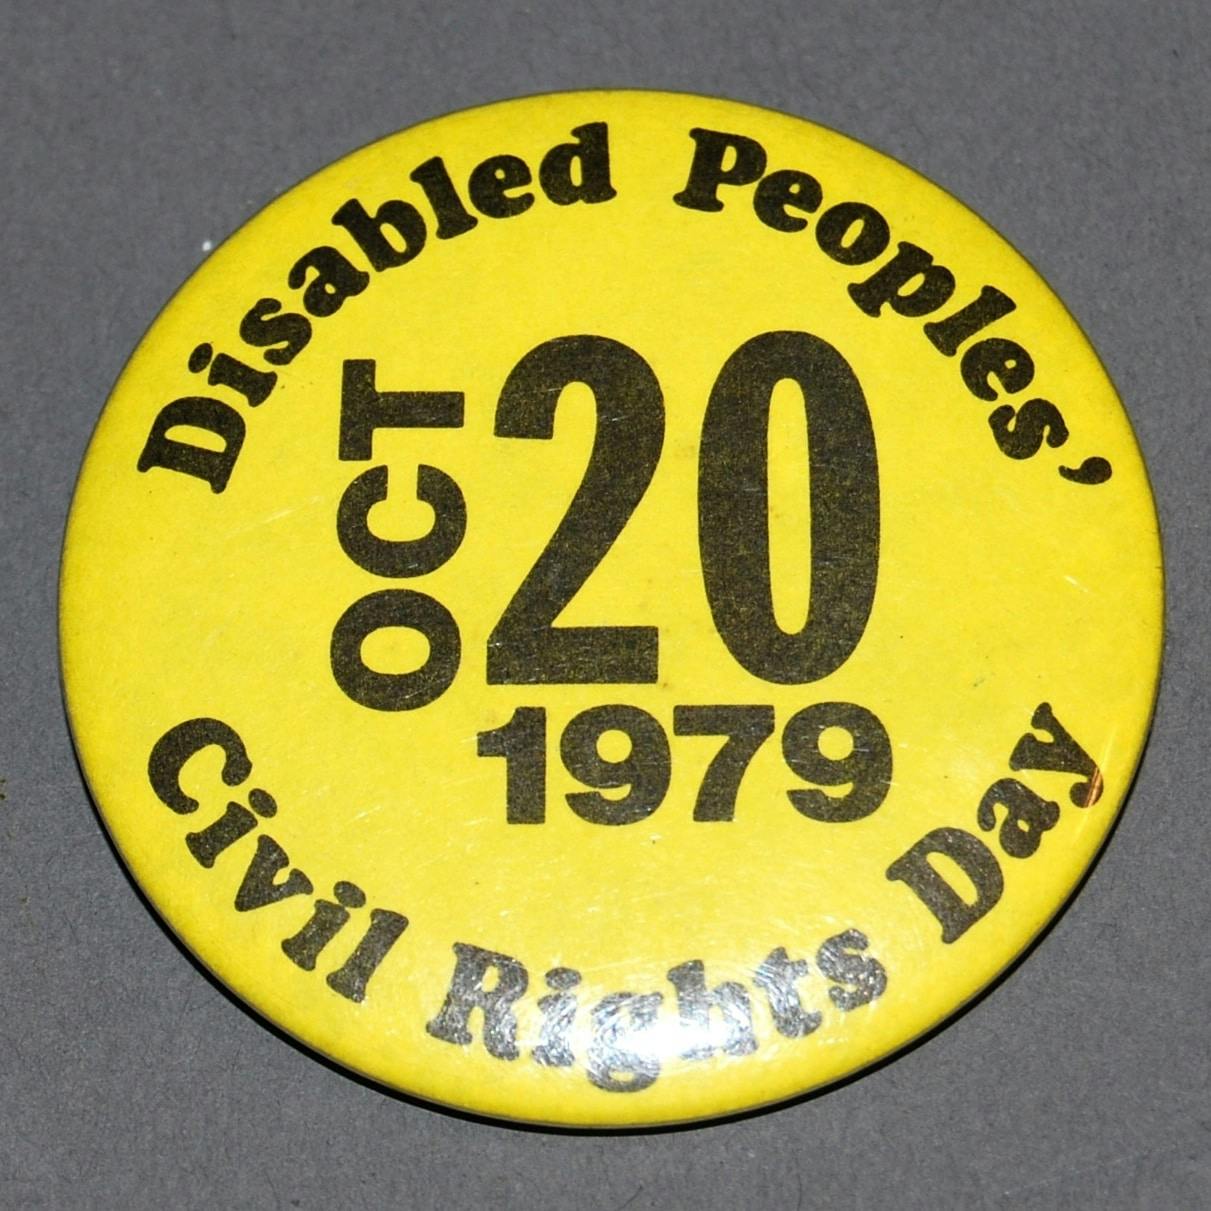 Yellow button that reads "Disabled Peoples' Civil Rights Day. Oct 20 1979"